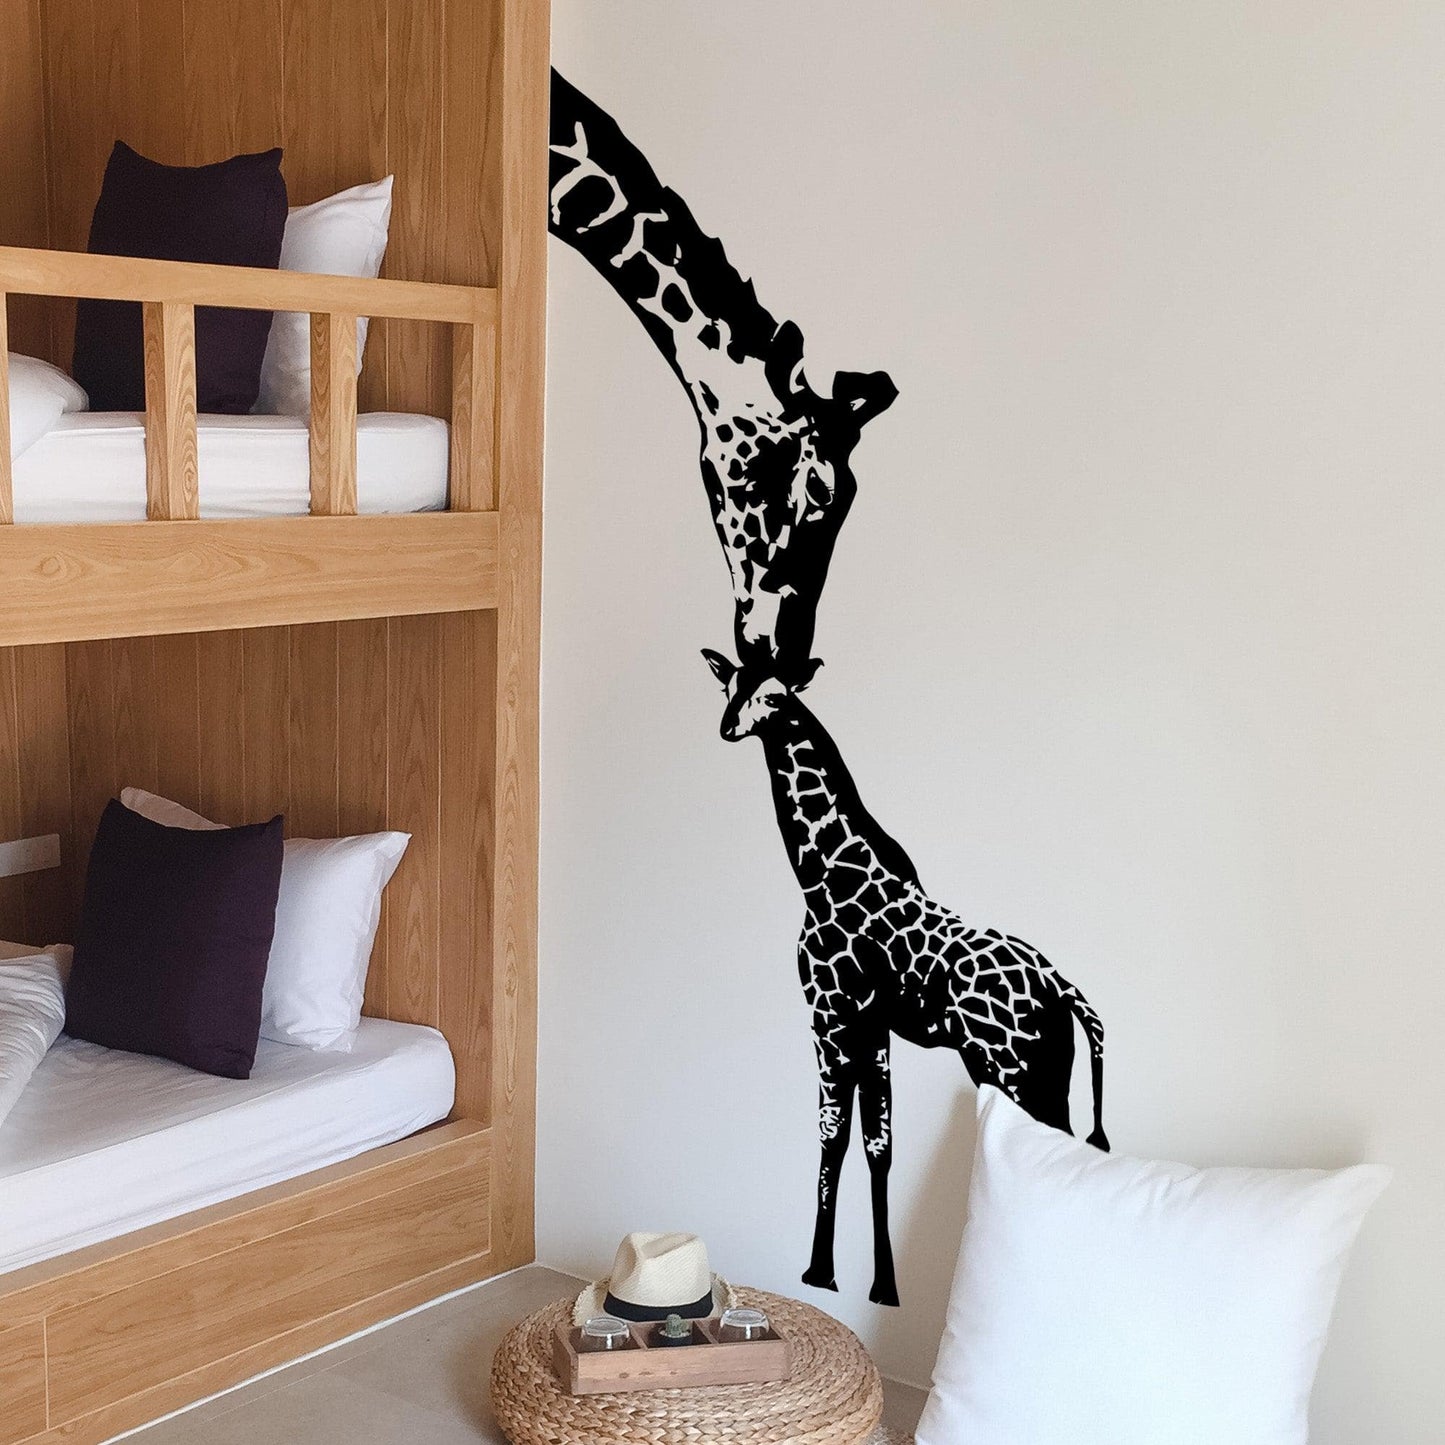 A black adult giraffe and a young giraffe decal on a white wall in a bedroom.